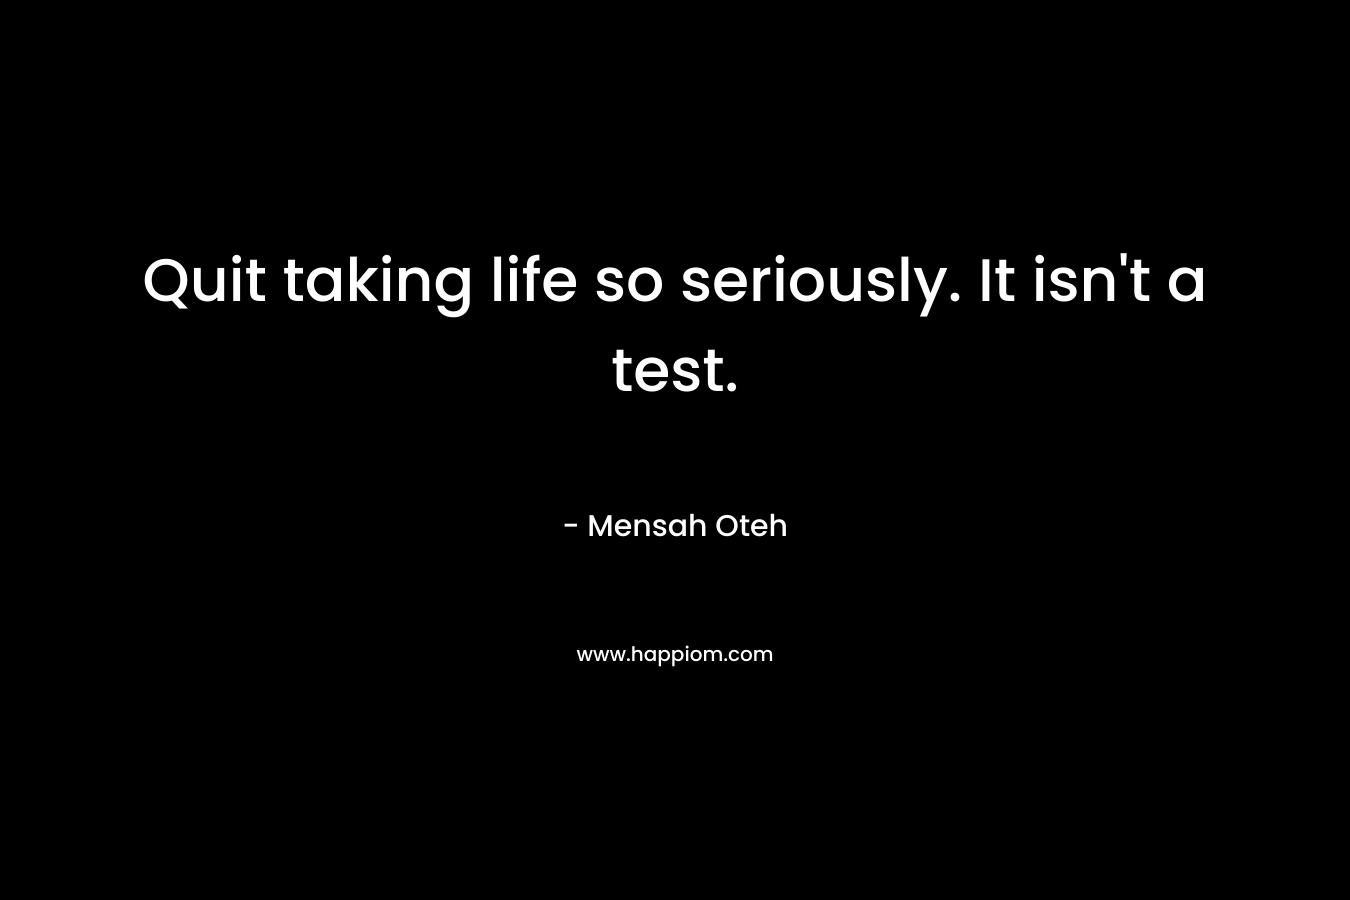 Quit taking life so seriously. It isn't a test.